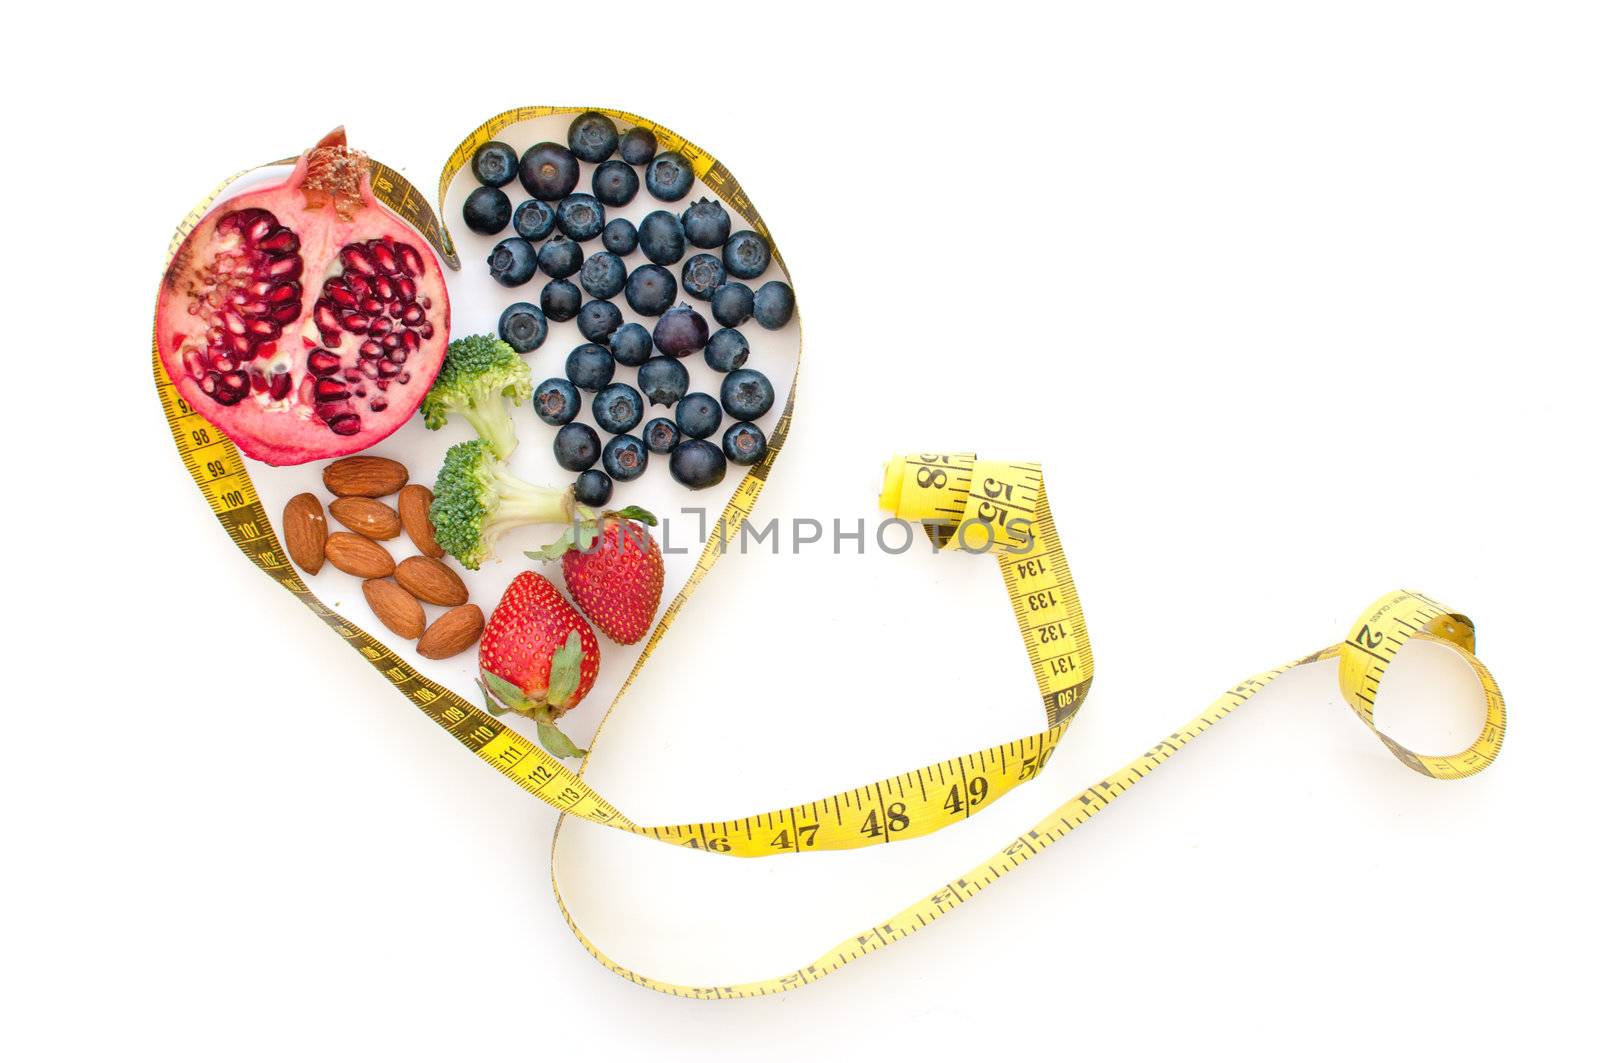 Superfoods such as pomegranate, blueberries and almonds inside a tape measure in the shape of a heart